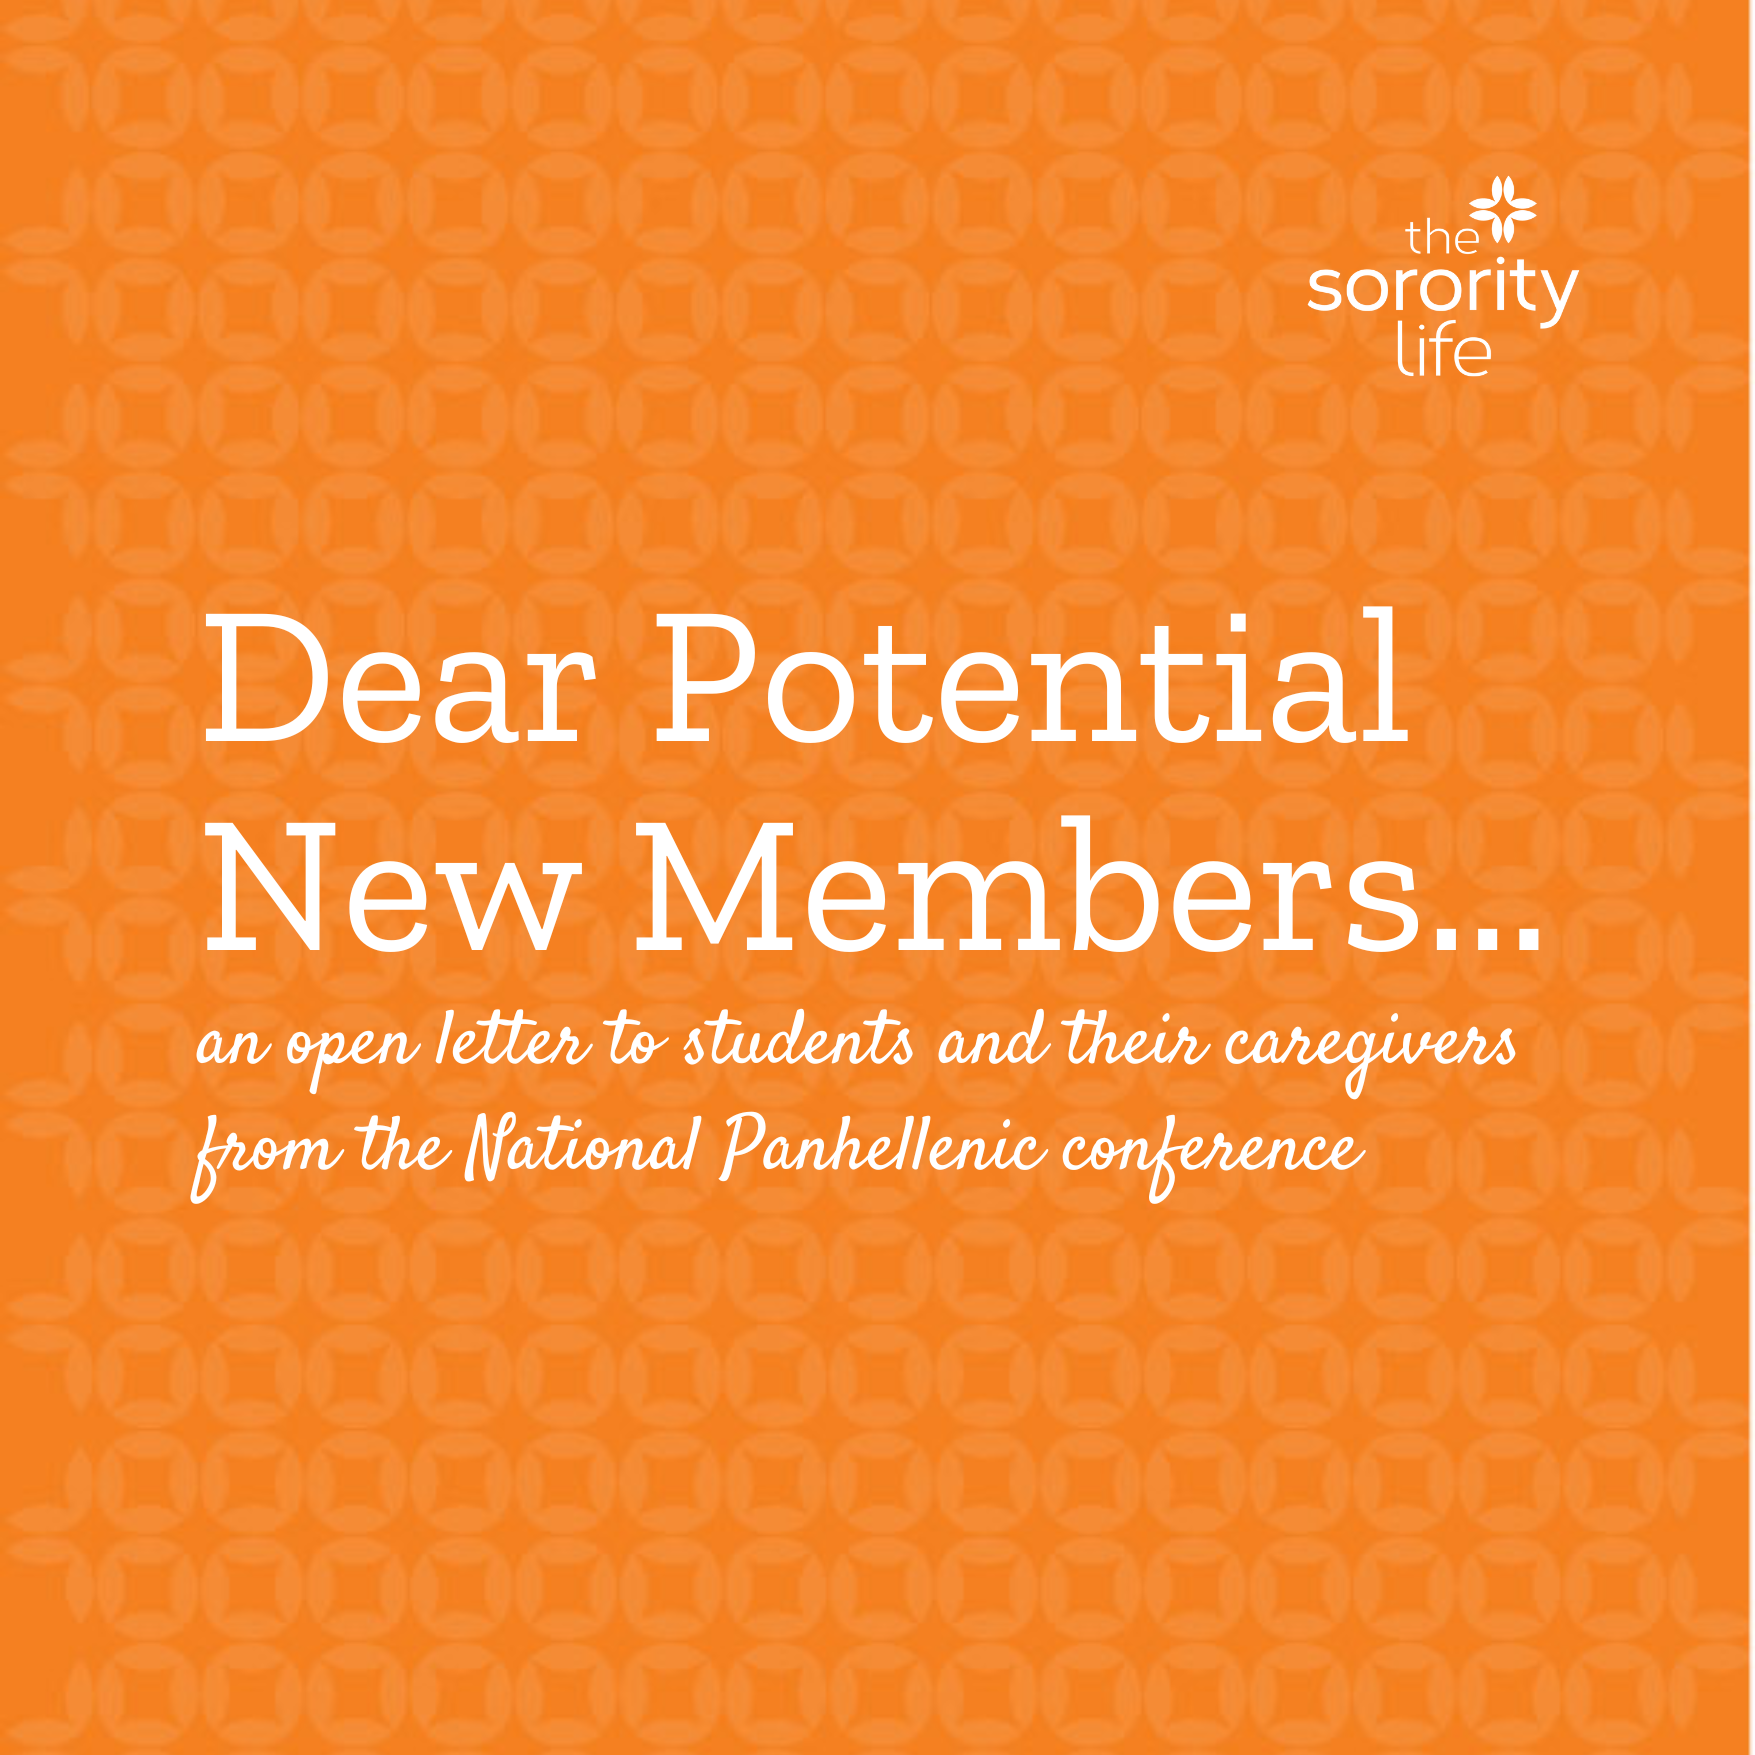 An Open Letter to Prospective New Members from the National Panhellenic Conference